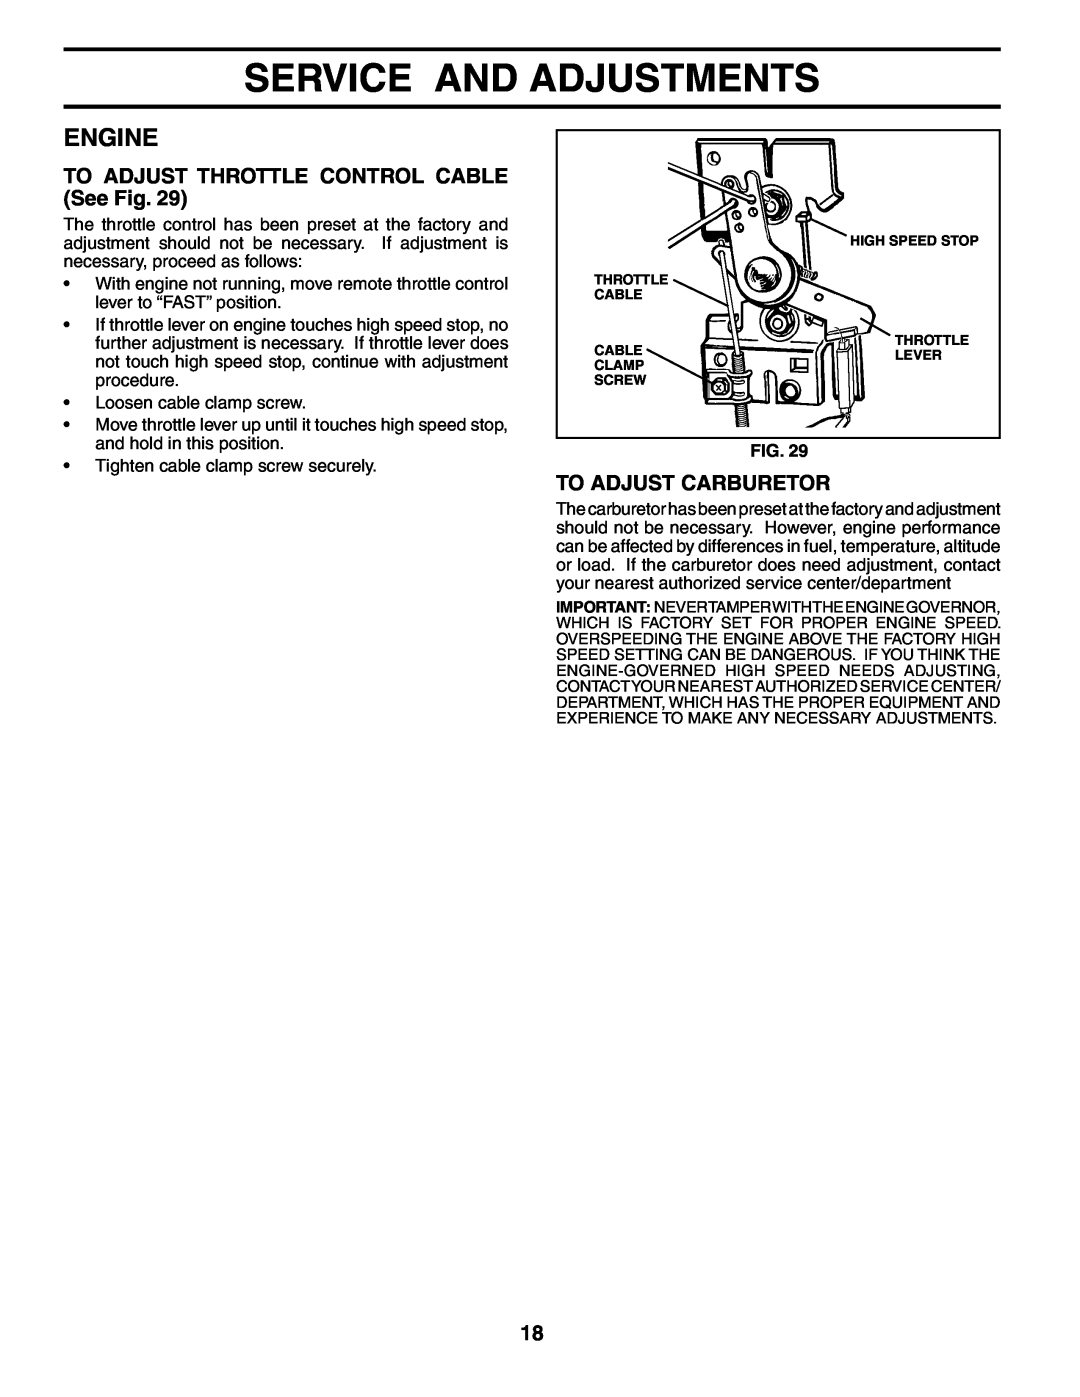 Weed Eater 186100 TO ADJUST THROTTLE CONTROL CABLE See Fig, To Adjust Carburetor, Service And Adjustments, Engine 